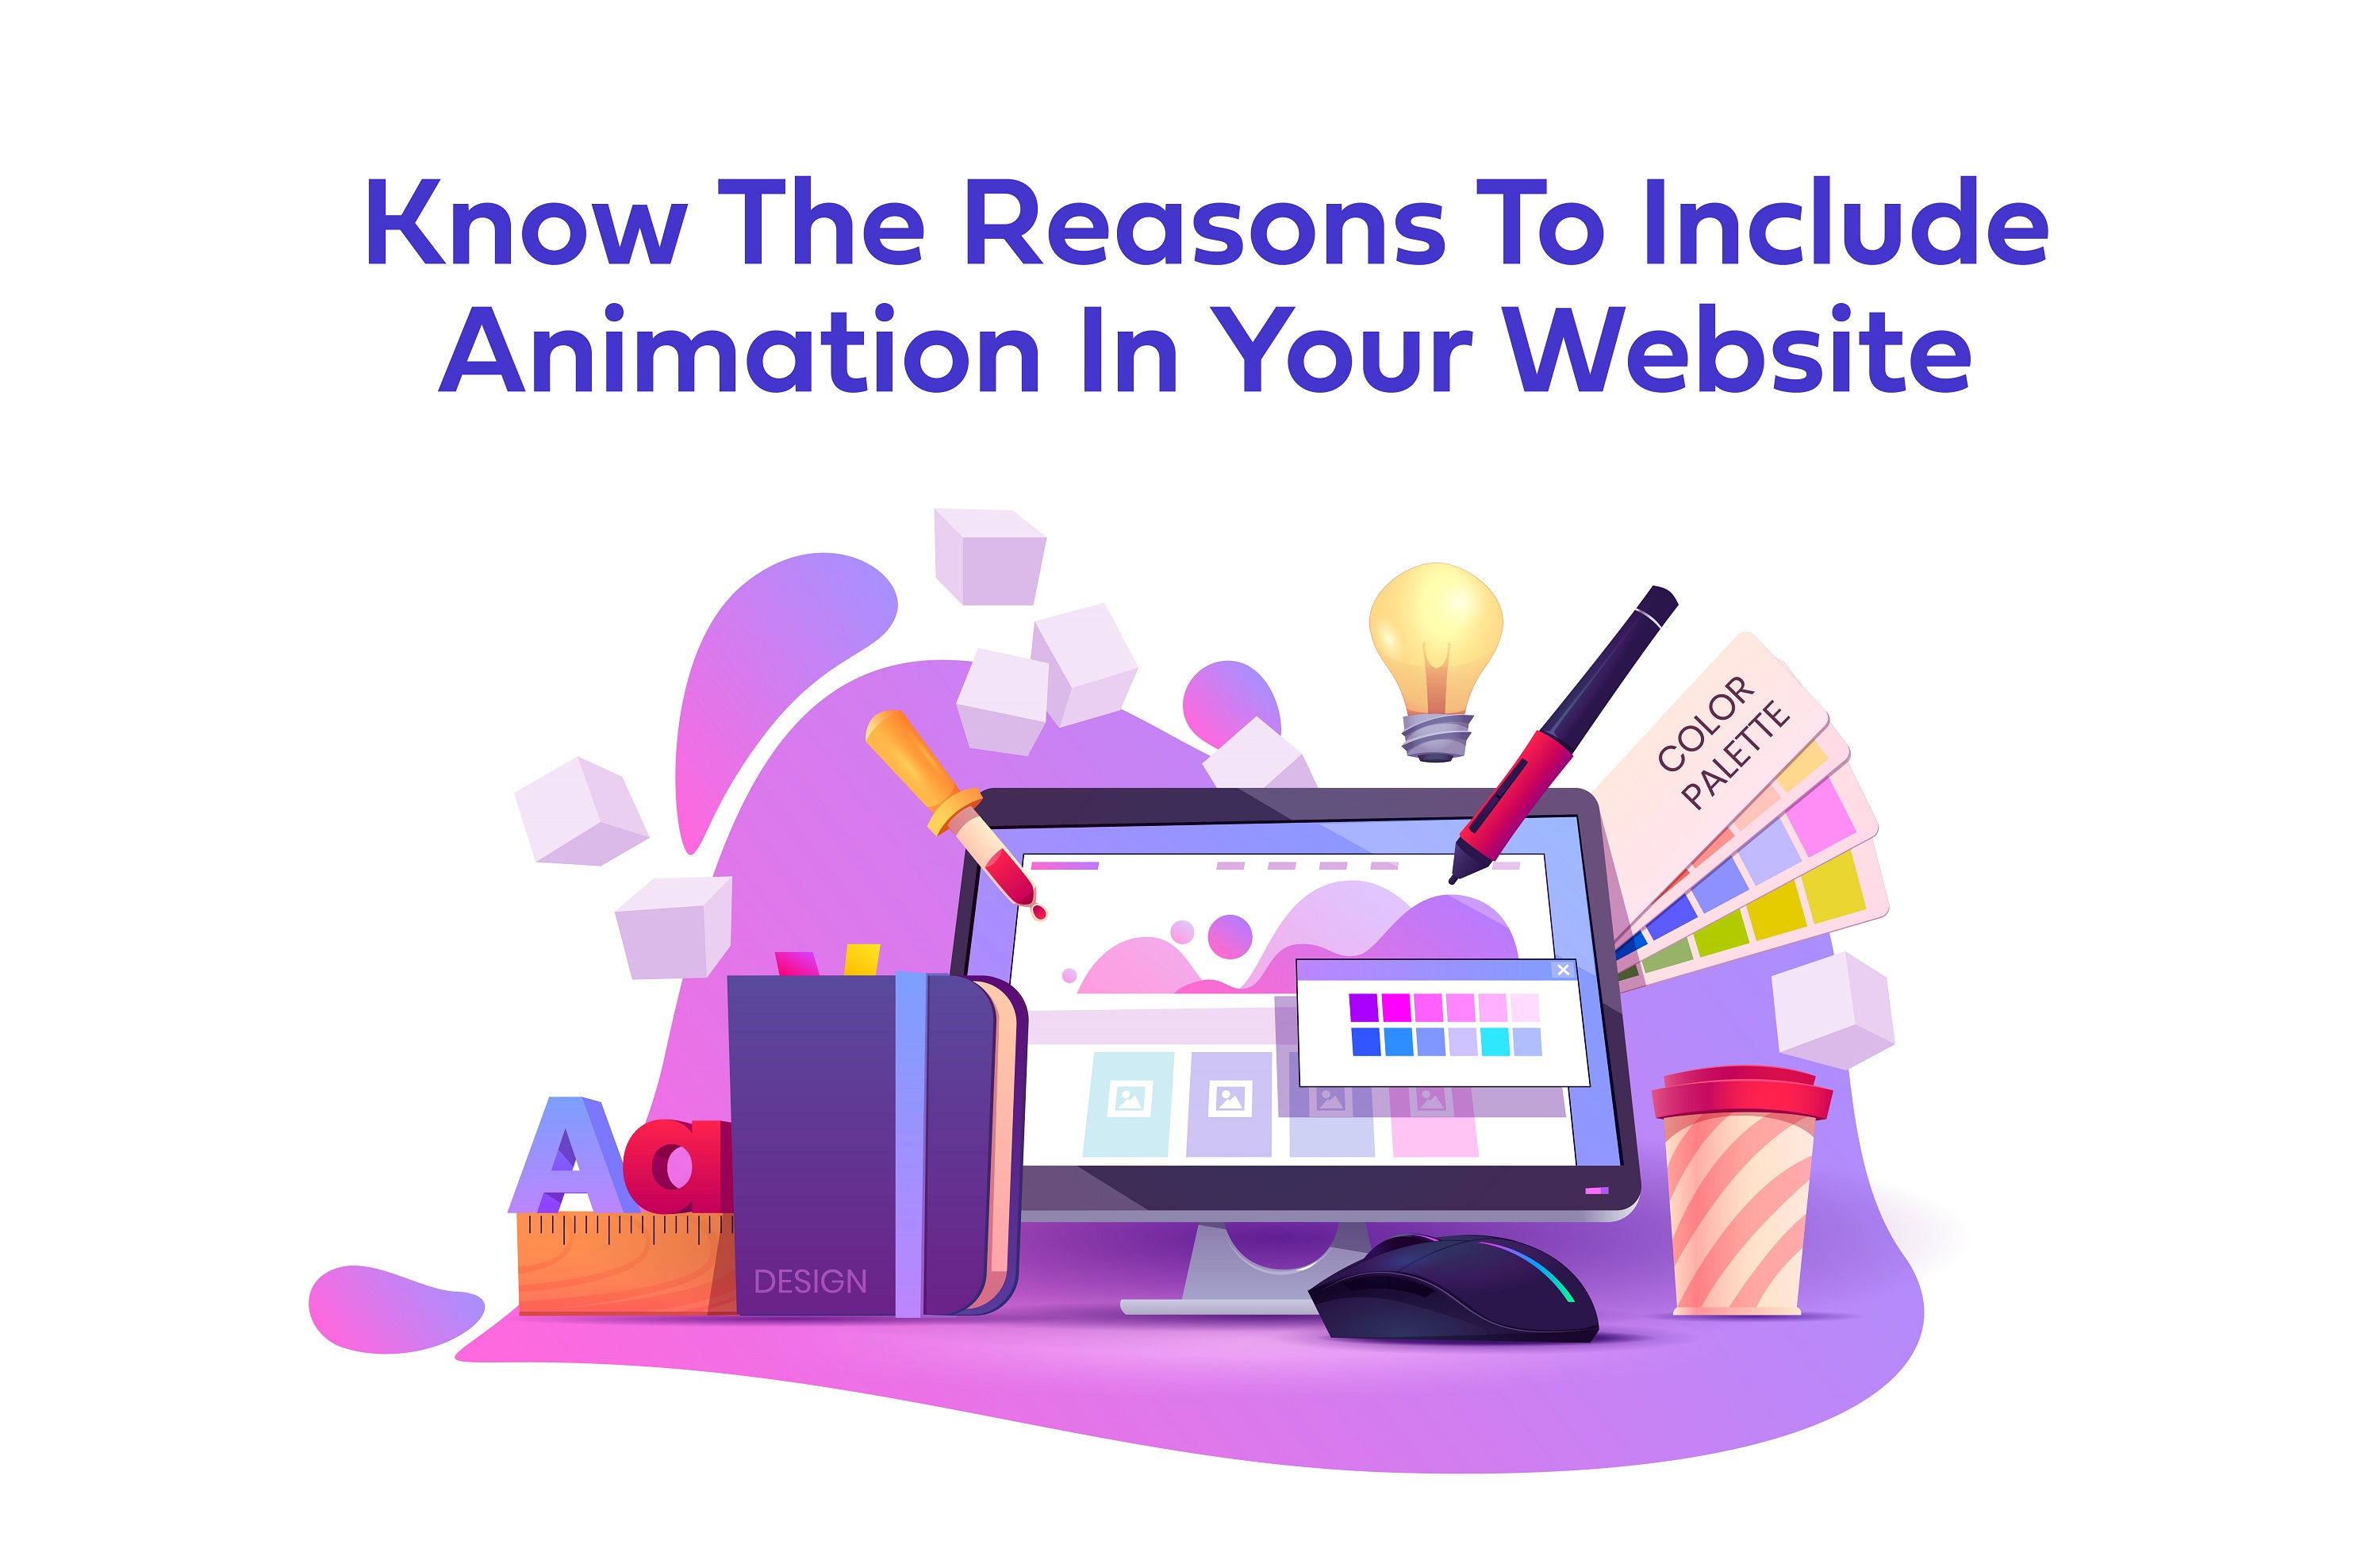 6 Reasons To Use Animation In Your Website Design